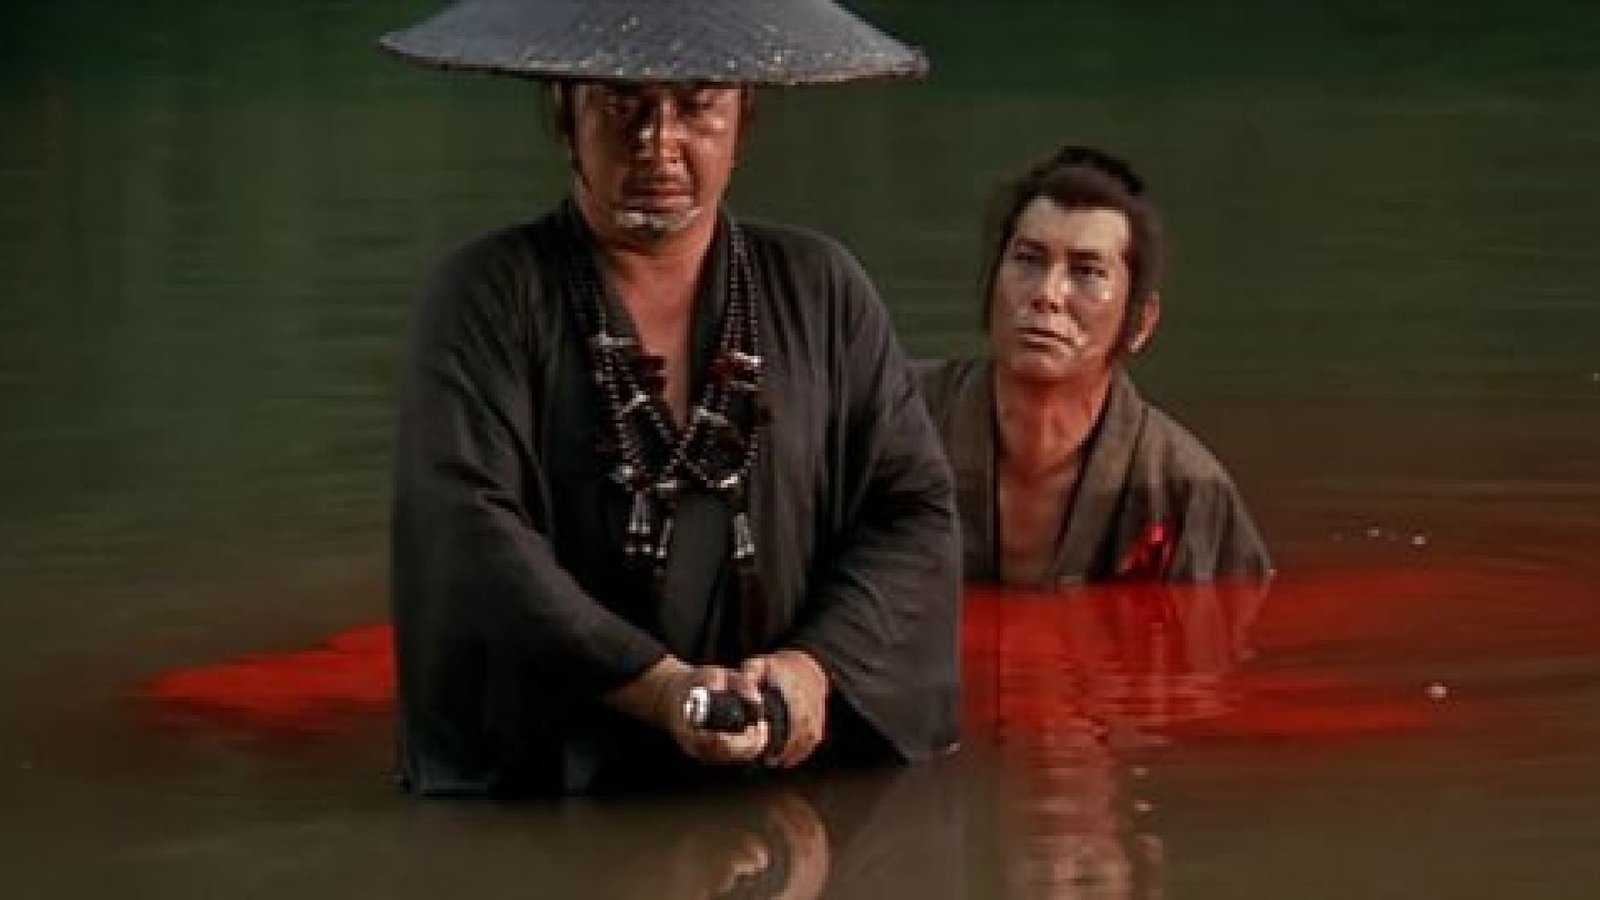 Best samurai movies: Lone wolf and cub: Baby Cart in the Land of Demons (1973)